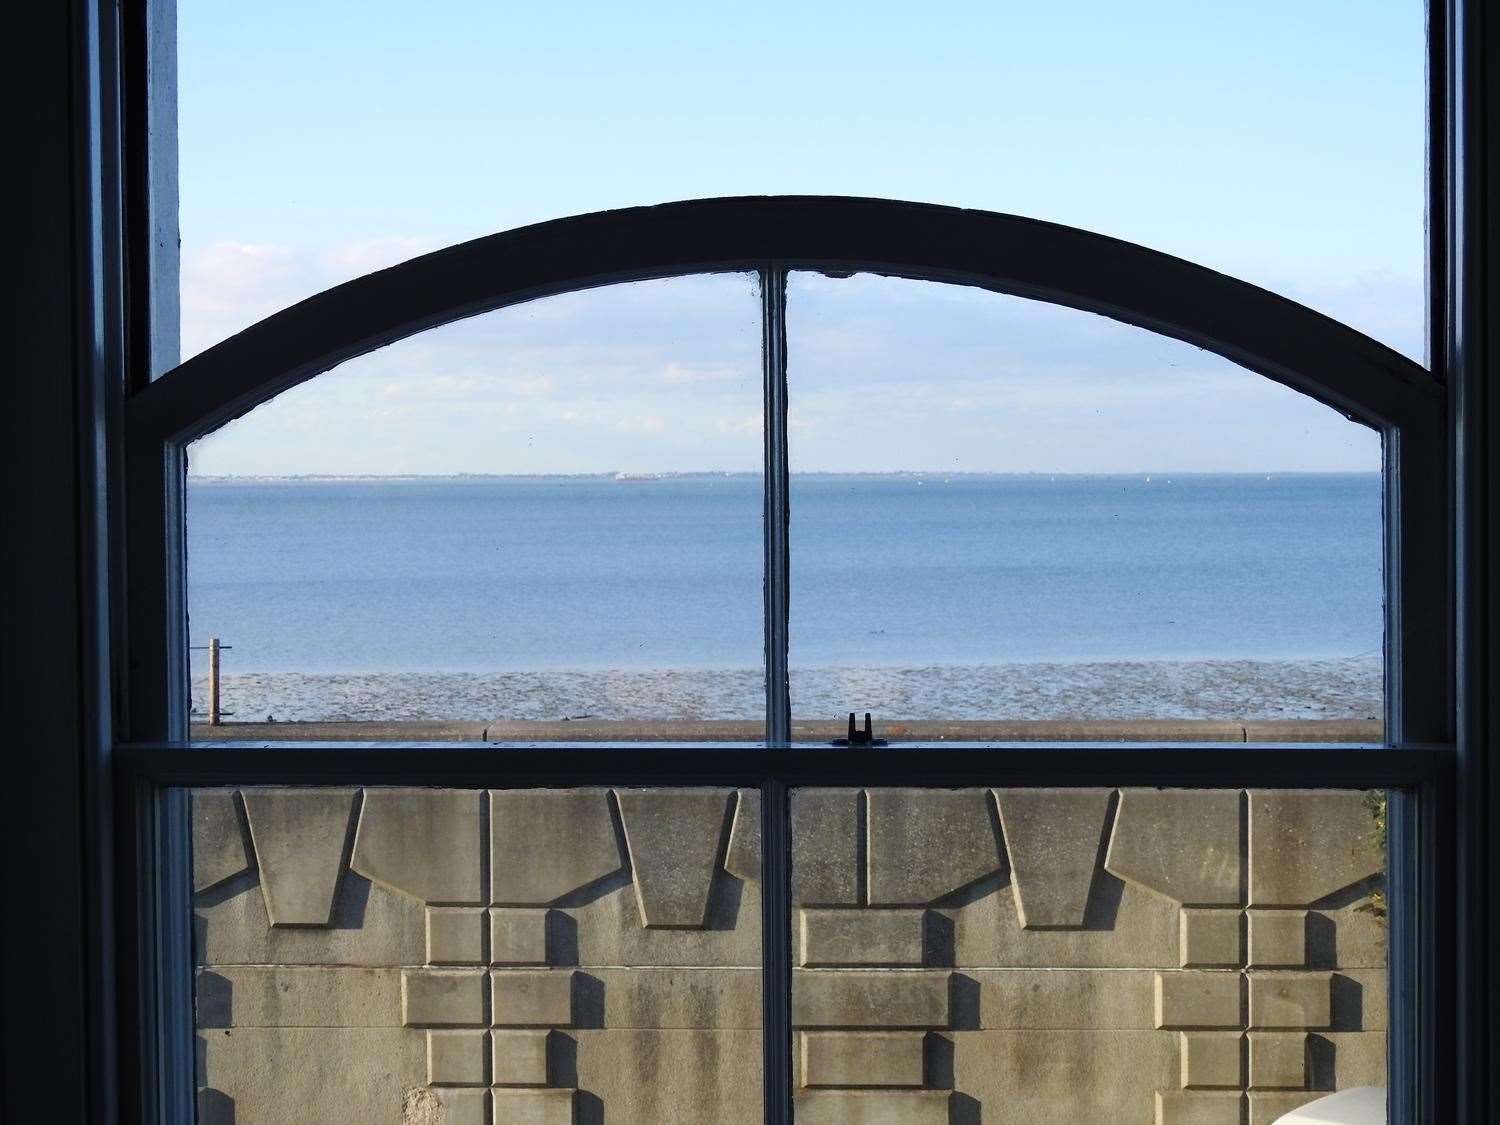 The view from German writer Uwe Johnson's window in Marine Parade, Sheerness, showing the sea wall and sea